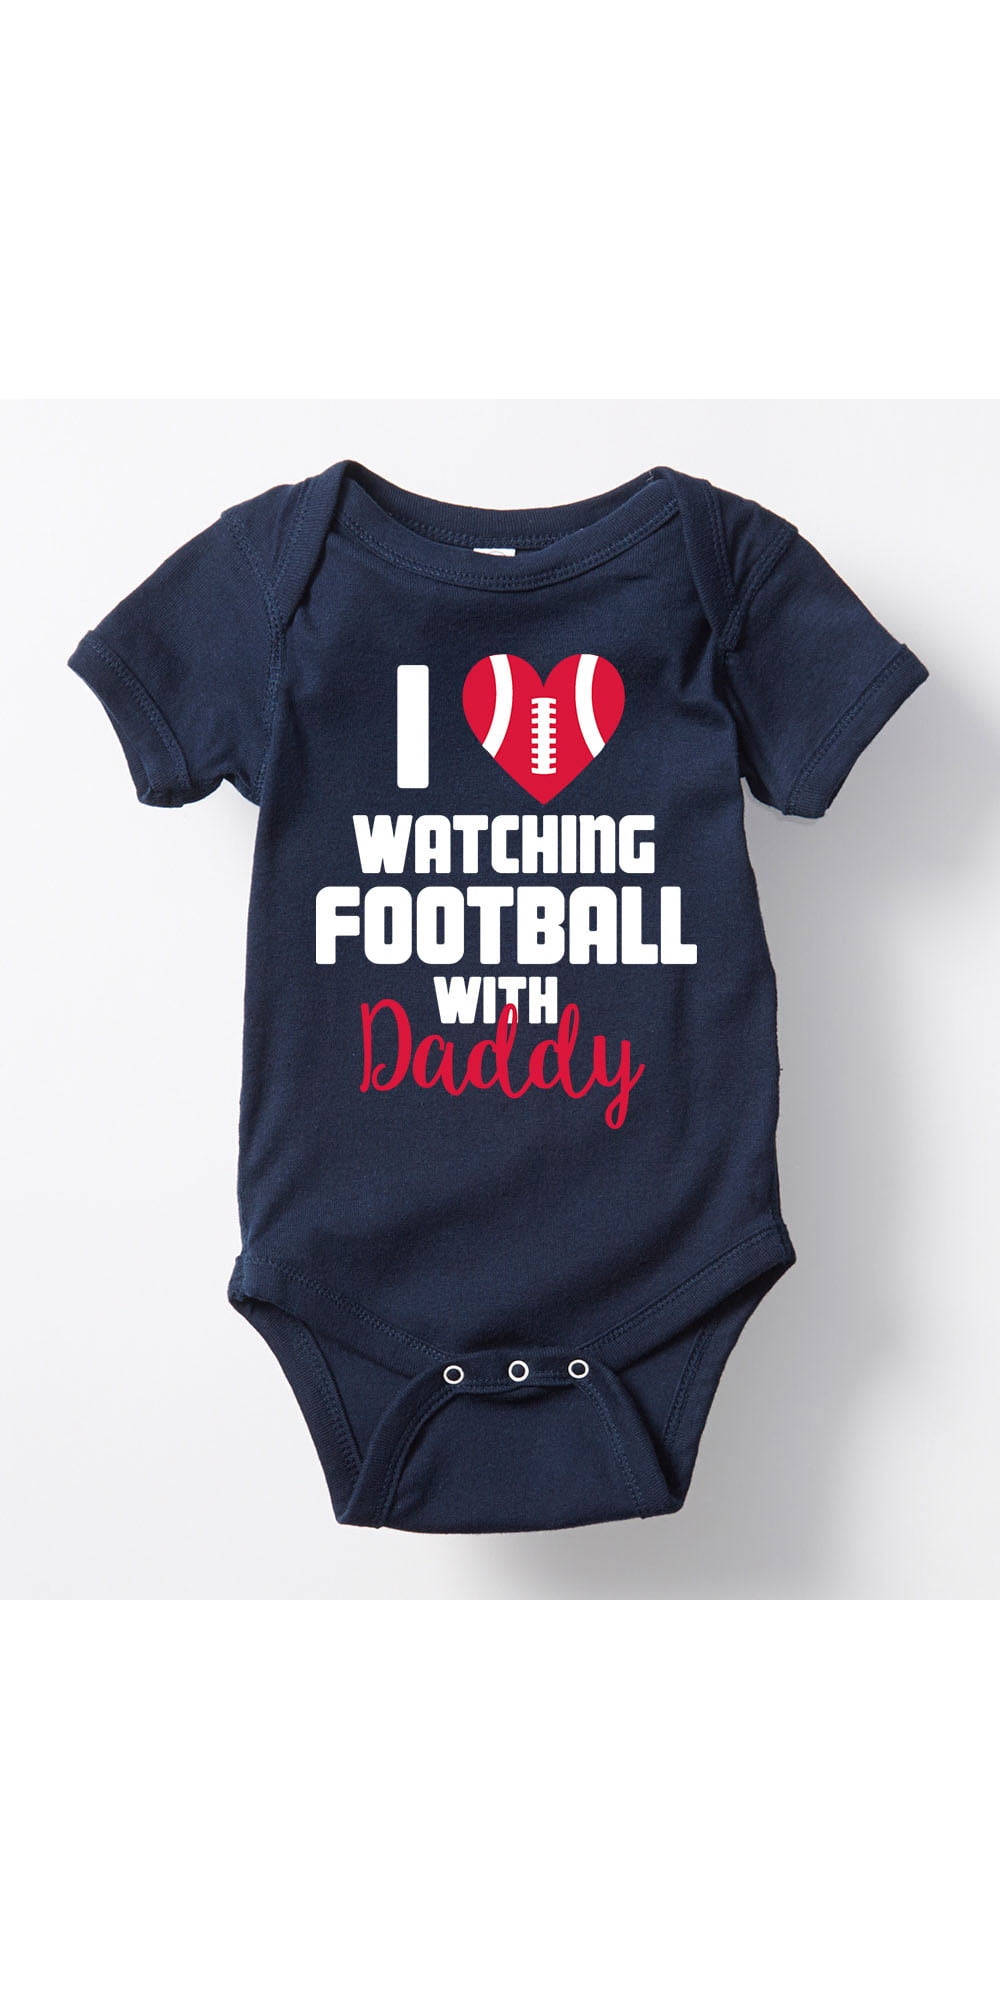 Black Baby Romper Jumpsuit with feet Shh I'm Watching Football with Daddy Statement BBY3 0-3 Months